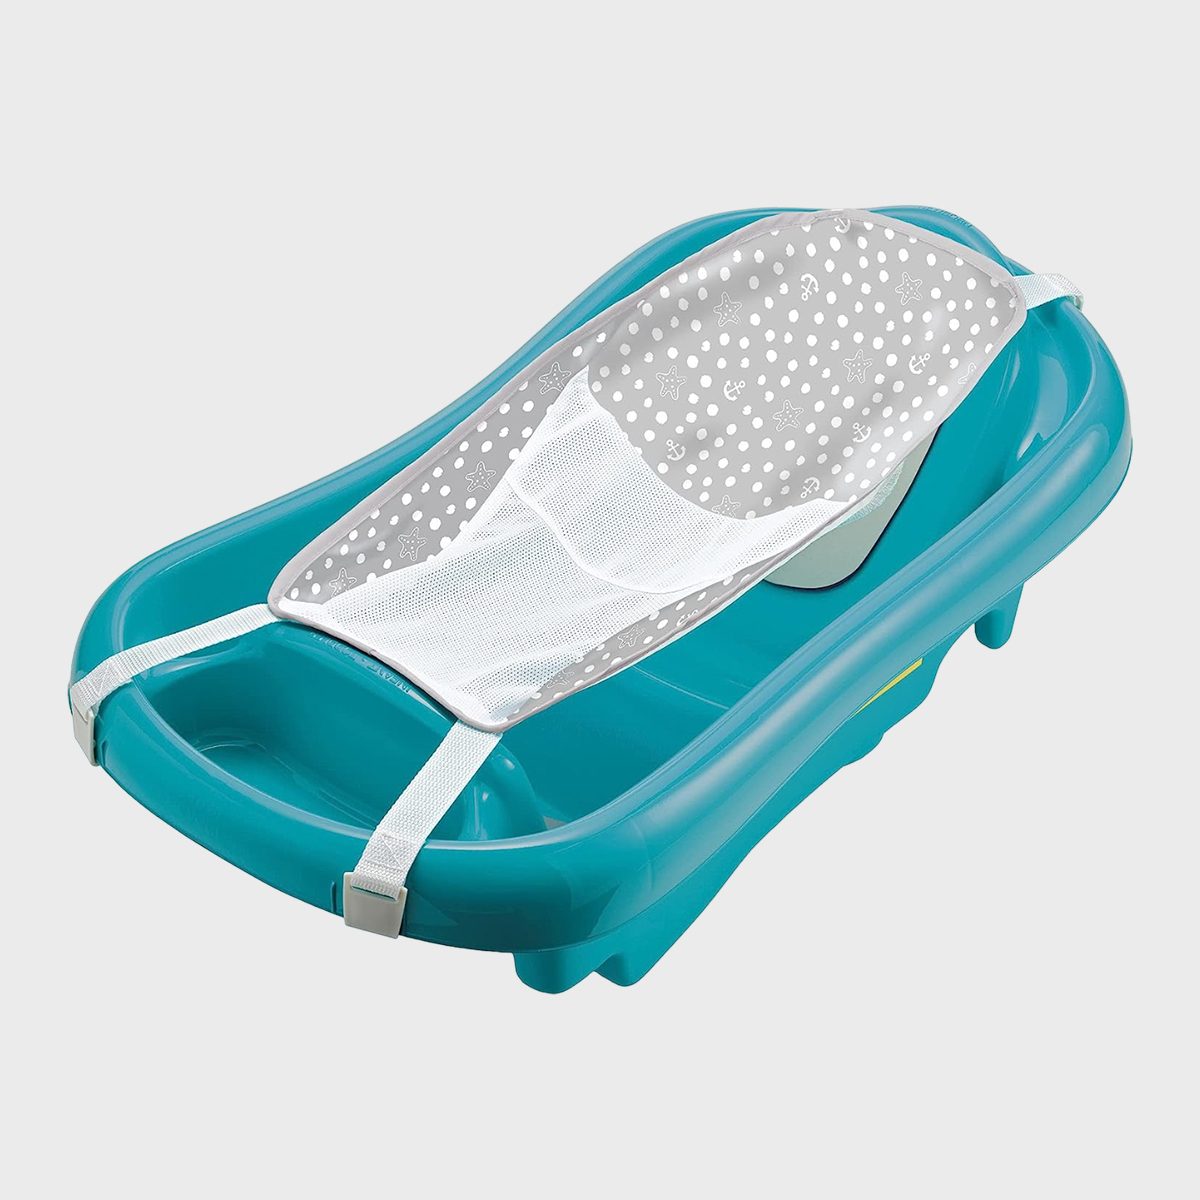 <p>Available in bright bubblegum pink, or teal, this budget-friendly <a href="https://www.amazon.com/First-Years-Comfort-Newborn-Toddler/dp/B000067EH7" rel="noopener noreferrer">baby tub</a> has all the bells and whistles of far more expensive models. It's an Amazon bestseller and a customer favorite, thanks to the included sling that makes bathing newborns and even the smallest babies a worry-free, easy experience.</p> <p>It also converts in a matter of moments to a perfect bathing bin for older babies and early toddlers. Fill this with cozy bath towels, washcloths, <a href="https://www.rd.com/article/antibacterial-soap-vs-regular-soap/">soaps</a>, lotions, and bath toys to make it one of those fun and useful group baby gifts.</p> <p class="listicle-page__cta-button-shop"><a class="shop-btn" href="https://www.amazon.com/First-Years-Comfort-Newborn-Toddler/dp/B000067EH7">Shop Now</a></p>